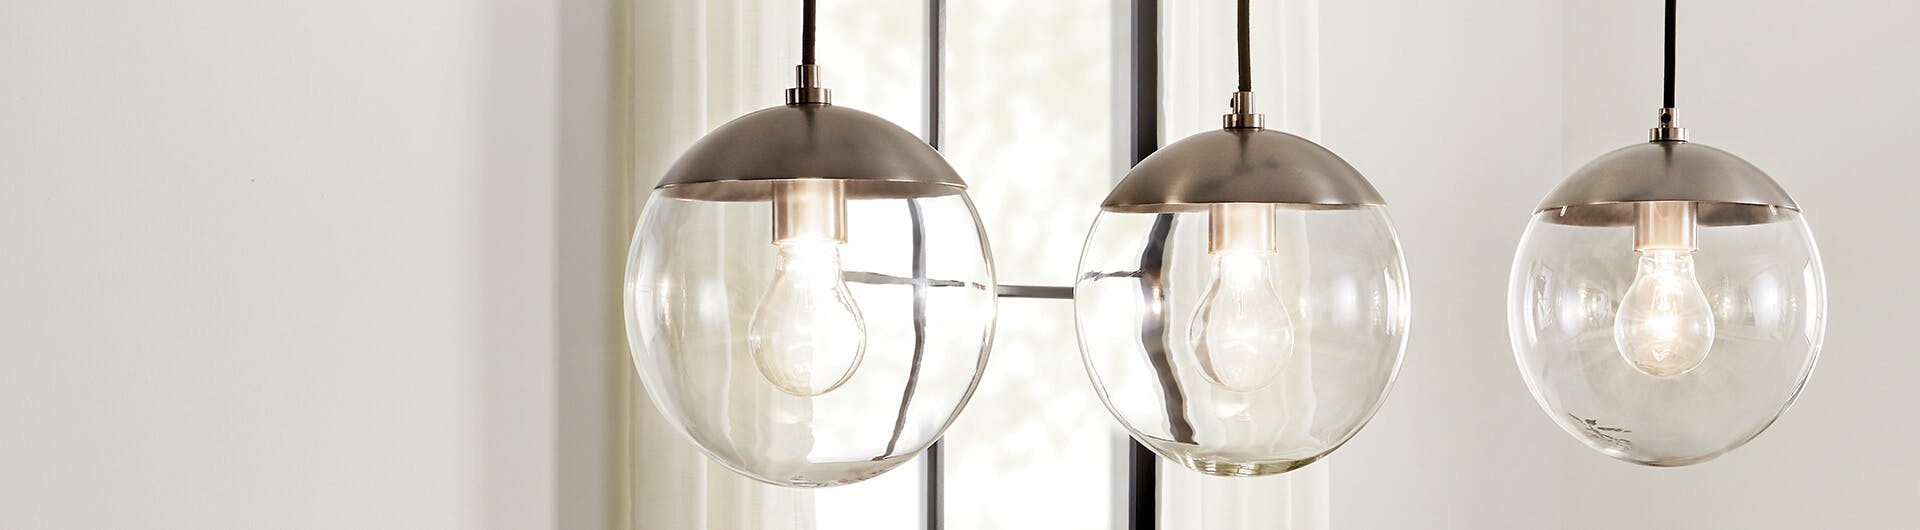 Close-up of three Malone hanging lights against a white background with a window